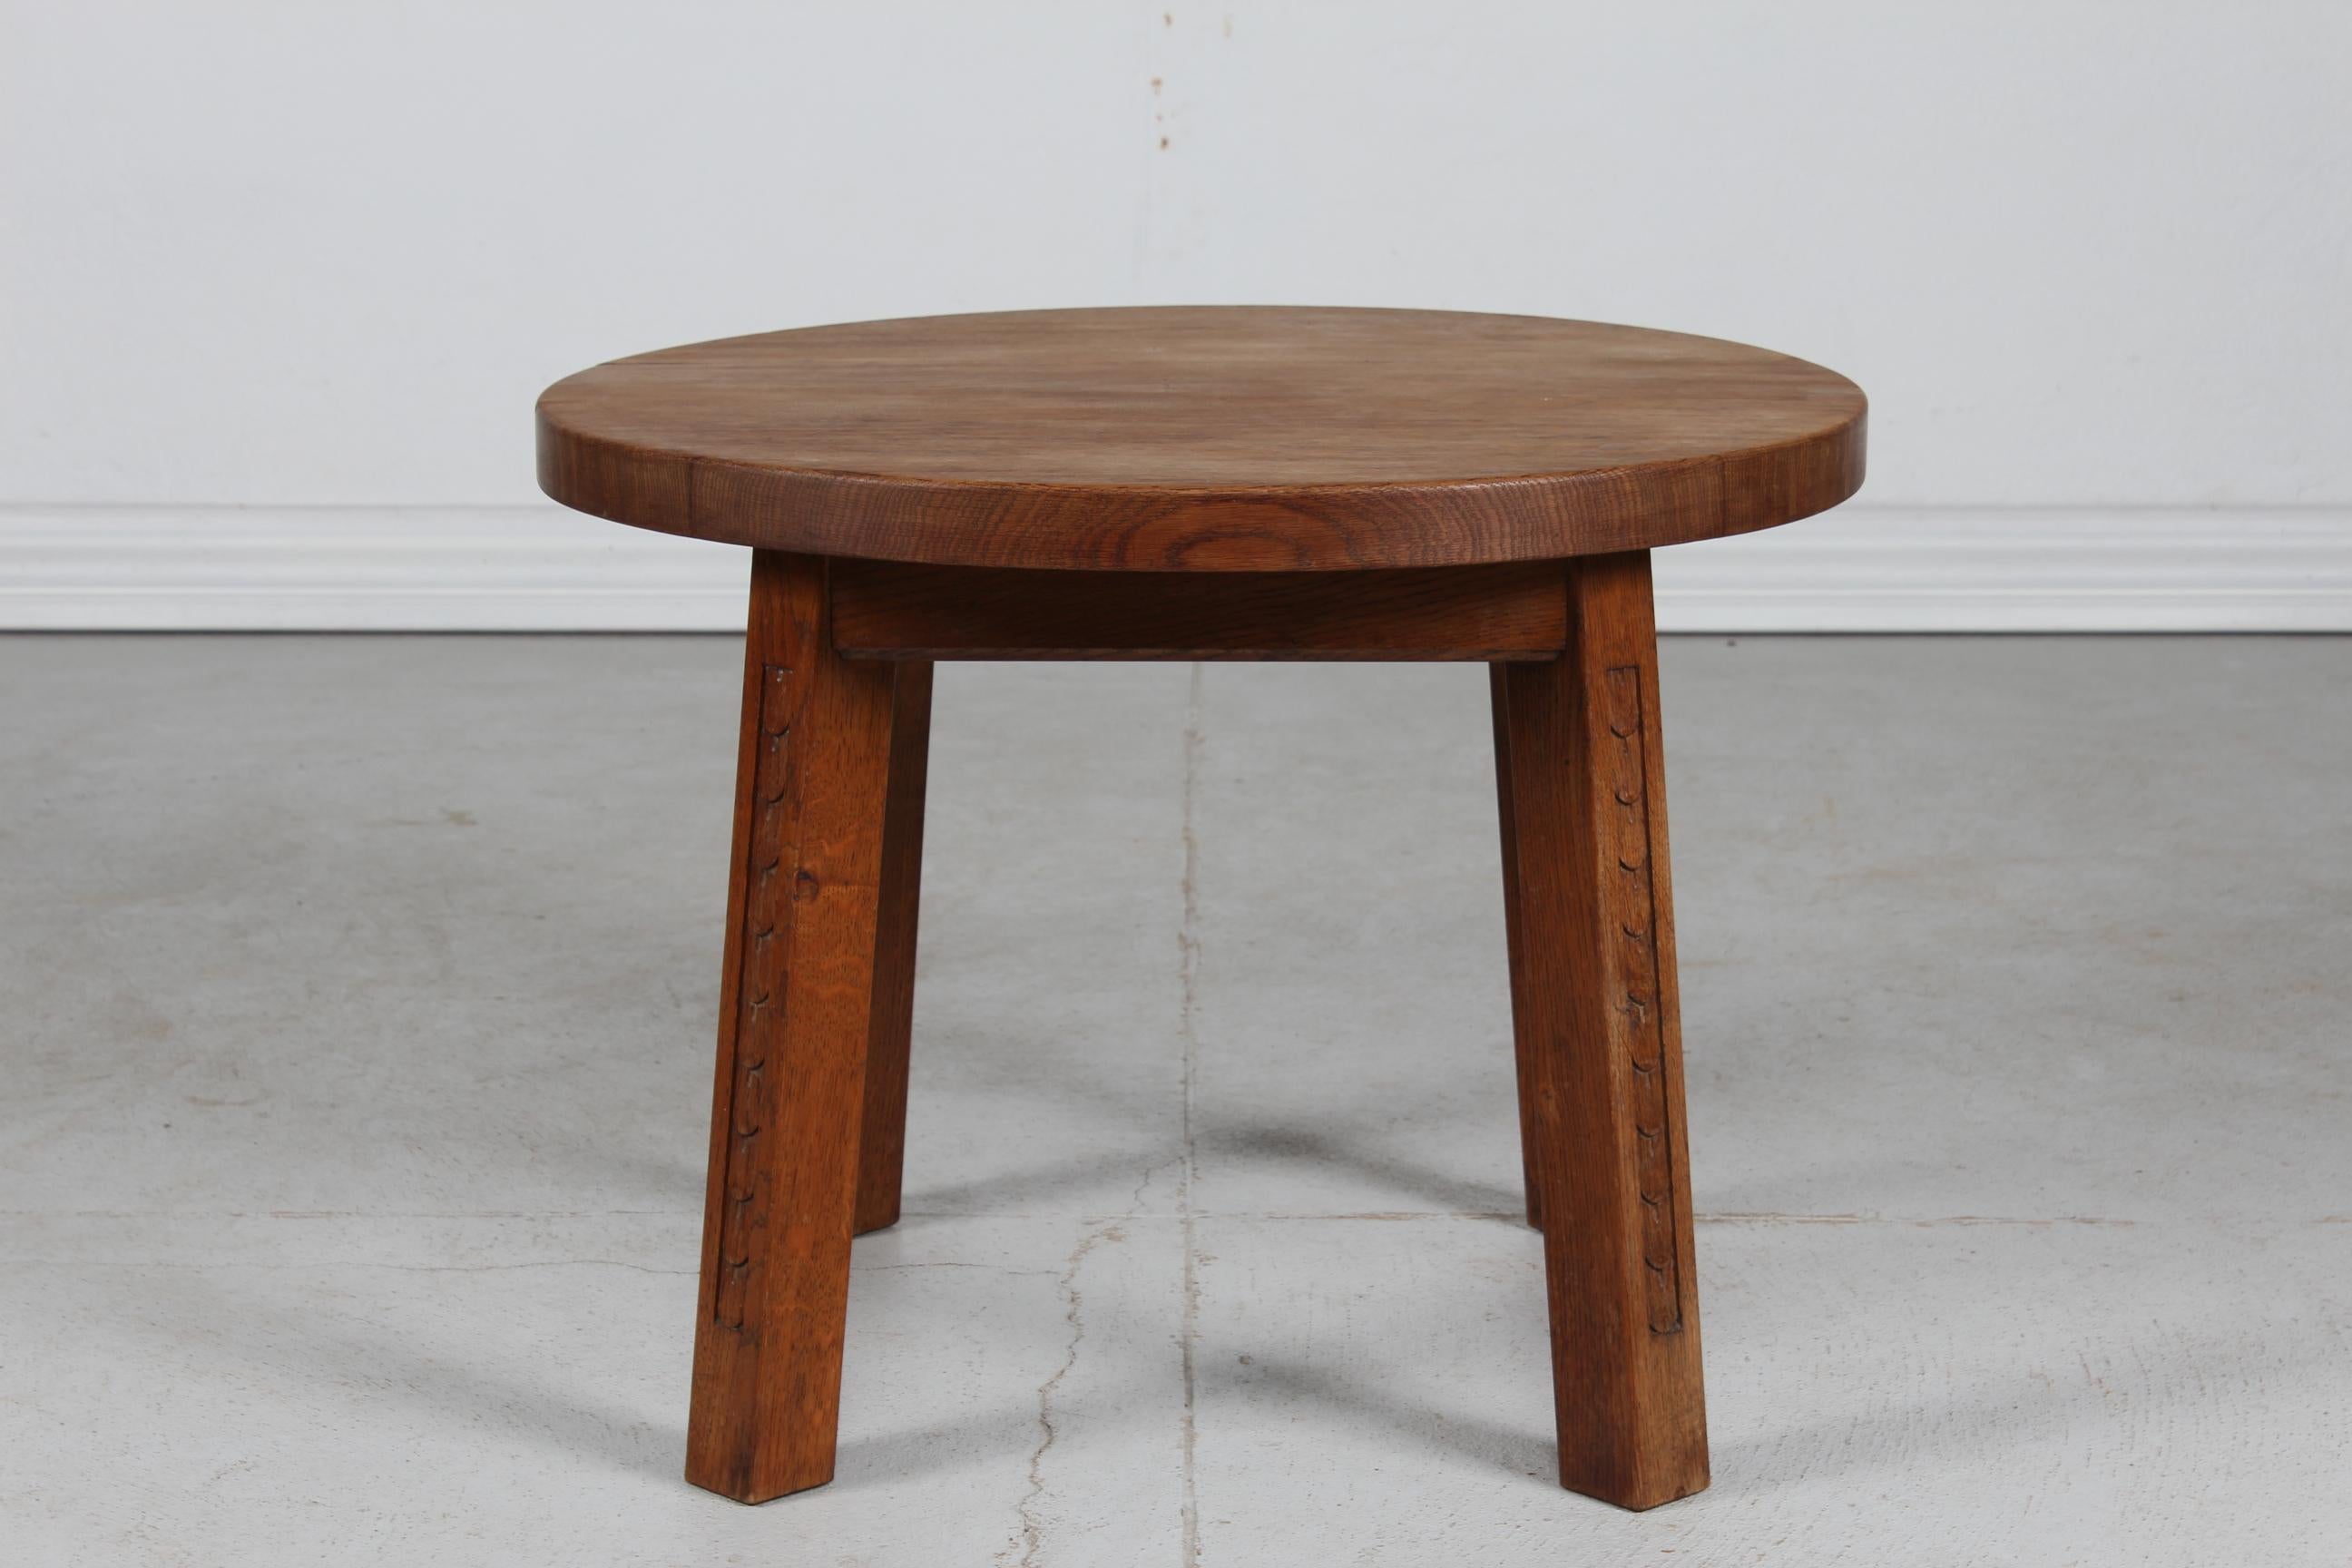 Danish brutalist style round coffee table of solid oak with a heavy tabletop on four square legs. On each of the four legs is a hand-carved relief.
Manufactured by a Danish cabinetmaker ca. 1950s. 
The design is in the style of Otto Færge and Axel